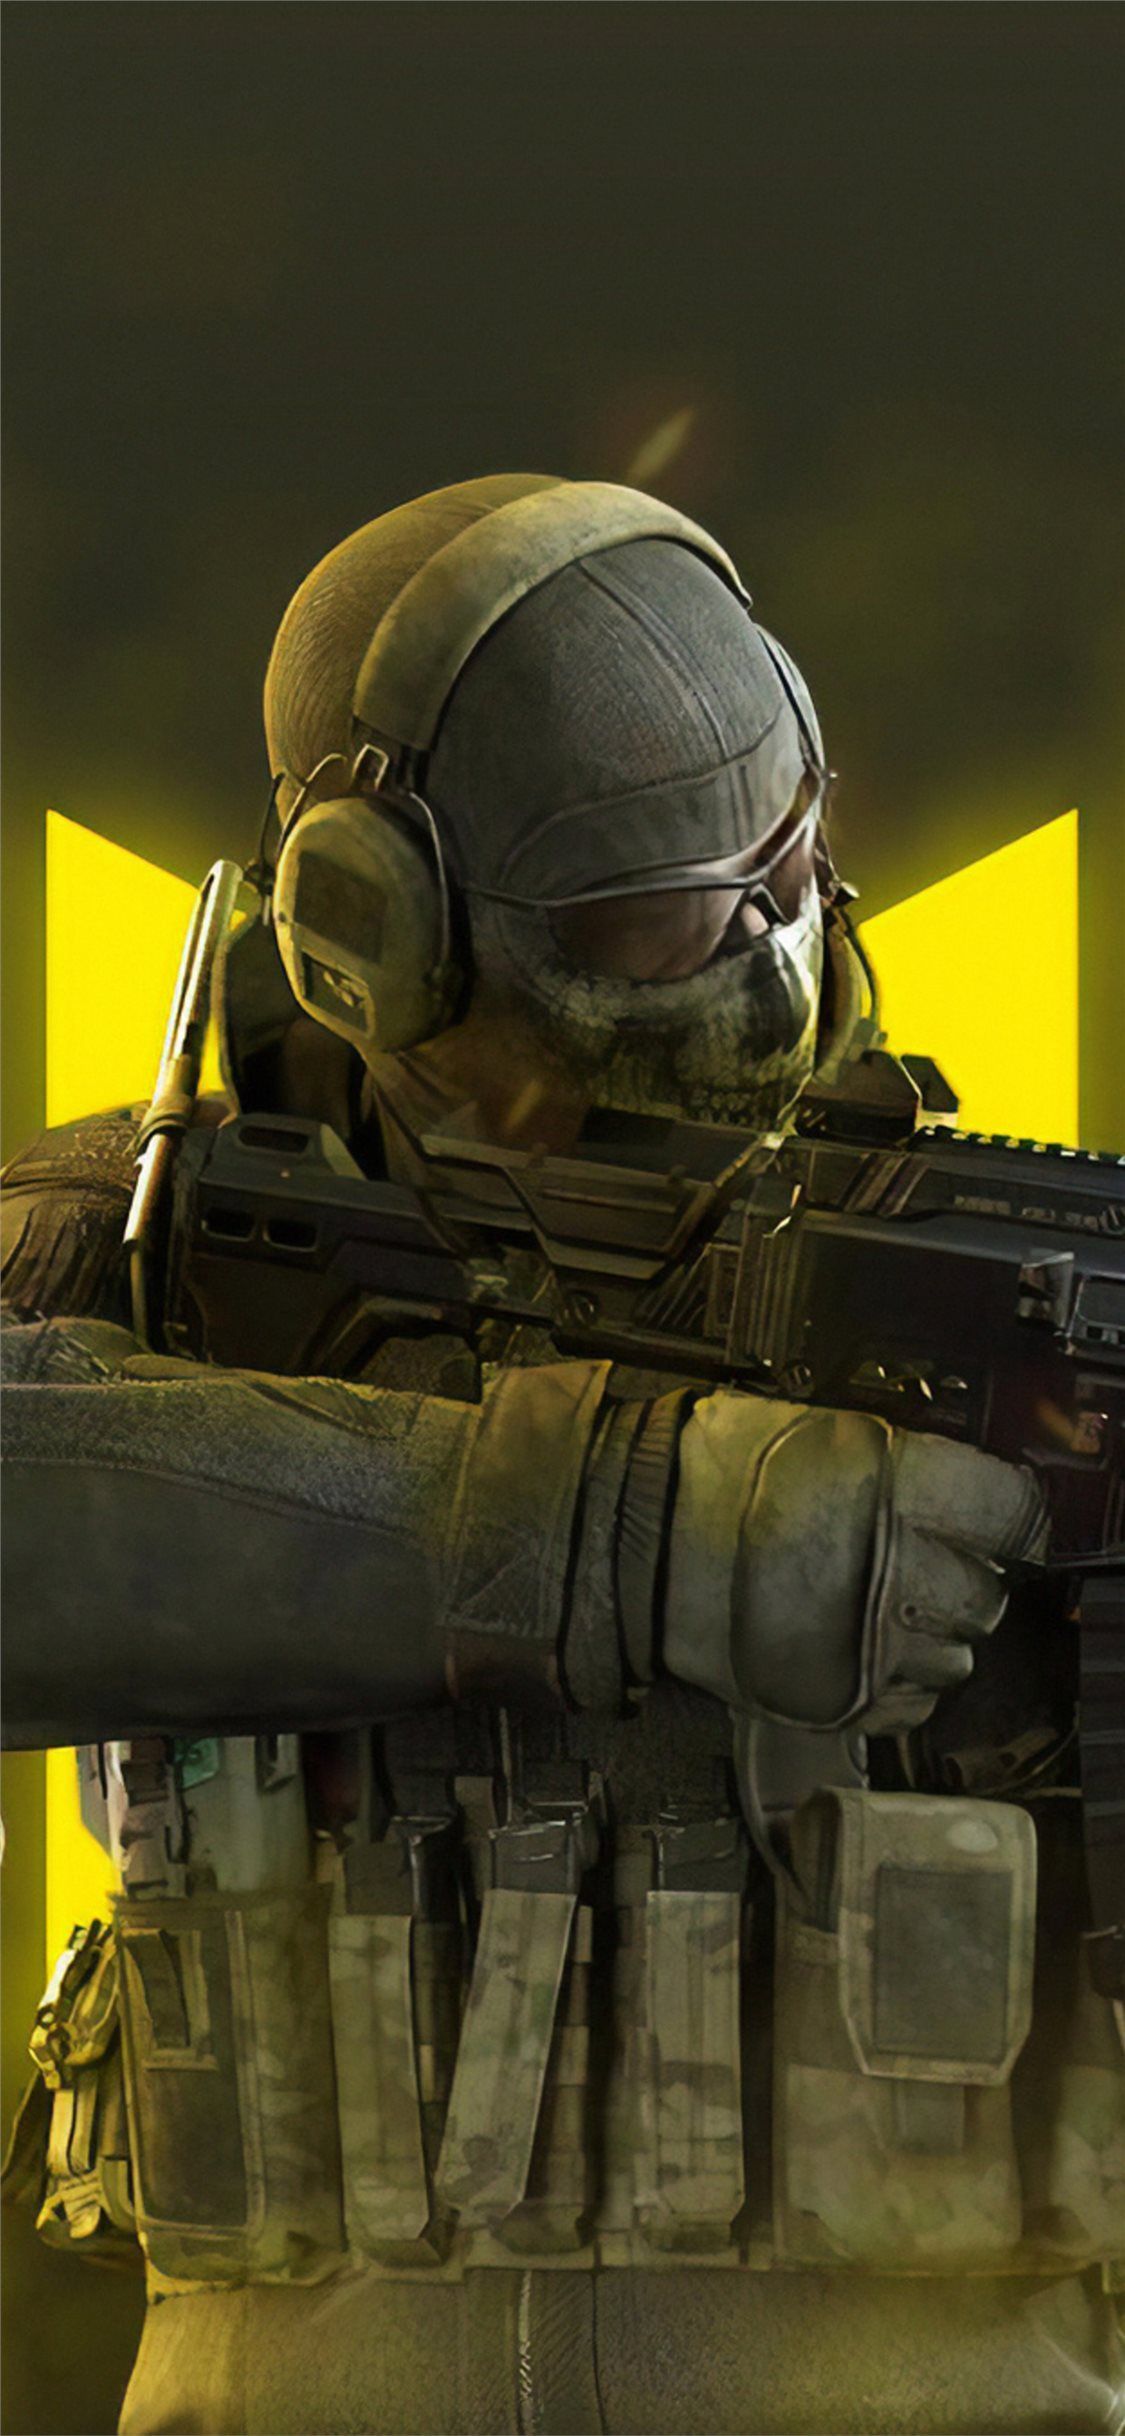 call of duty mobile 4k 2019 iPhone X Wallpaper. Tapetes, Atrizes